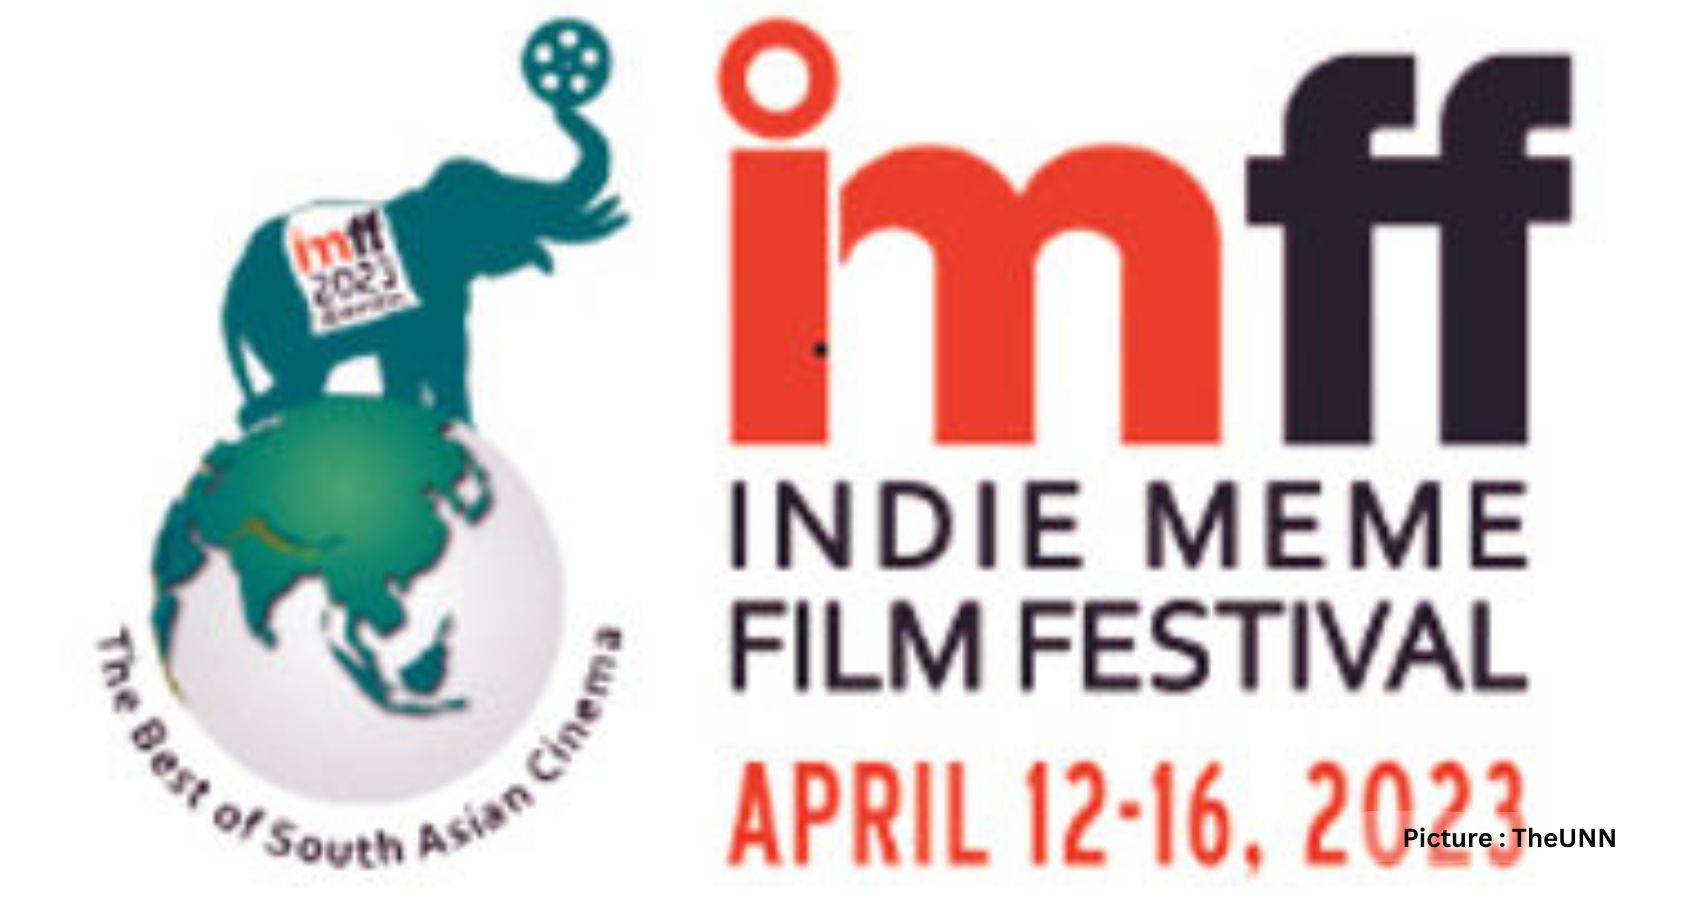 Indie Meme Film Festival Showcases Social & Political Issues From South Asia And Iran